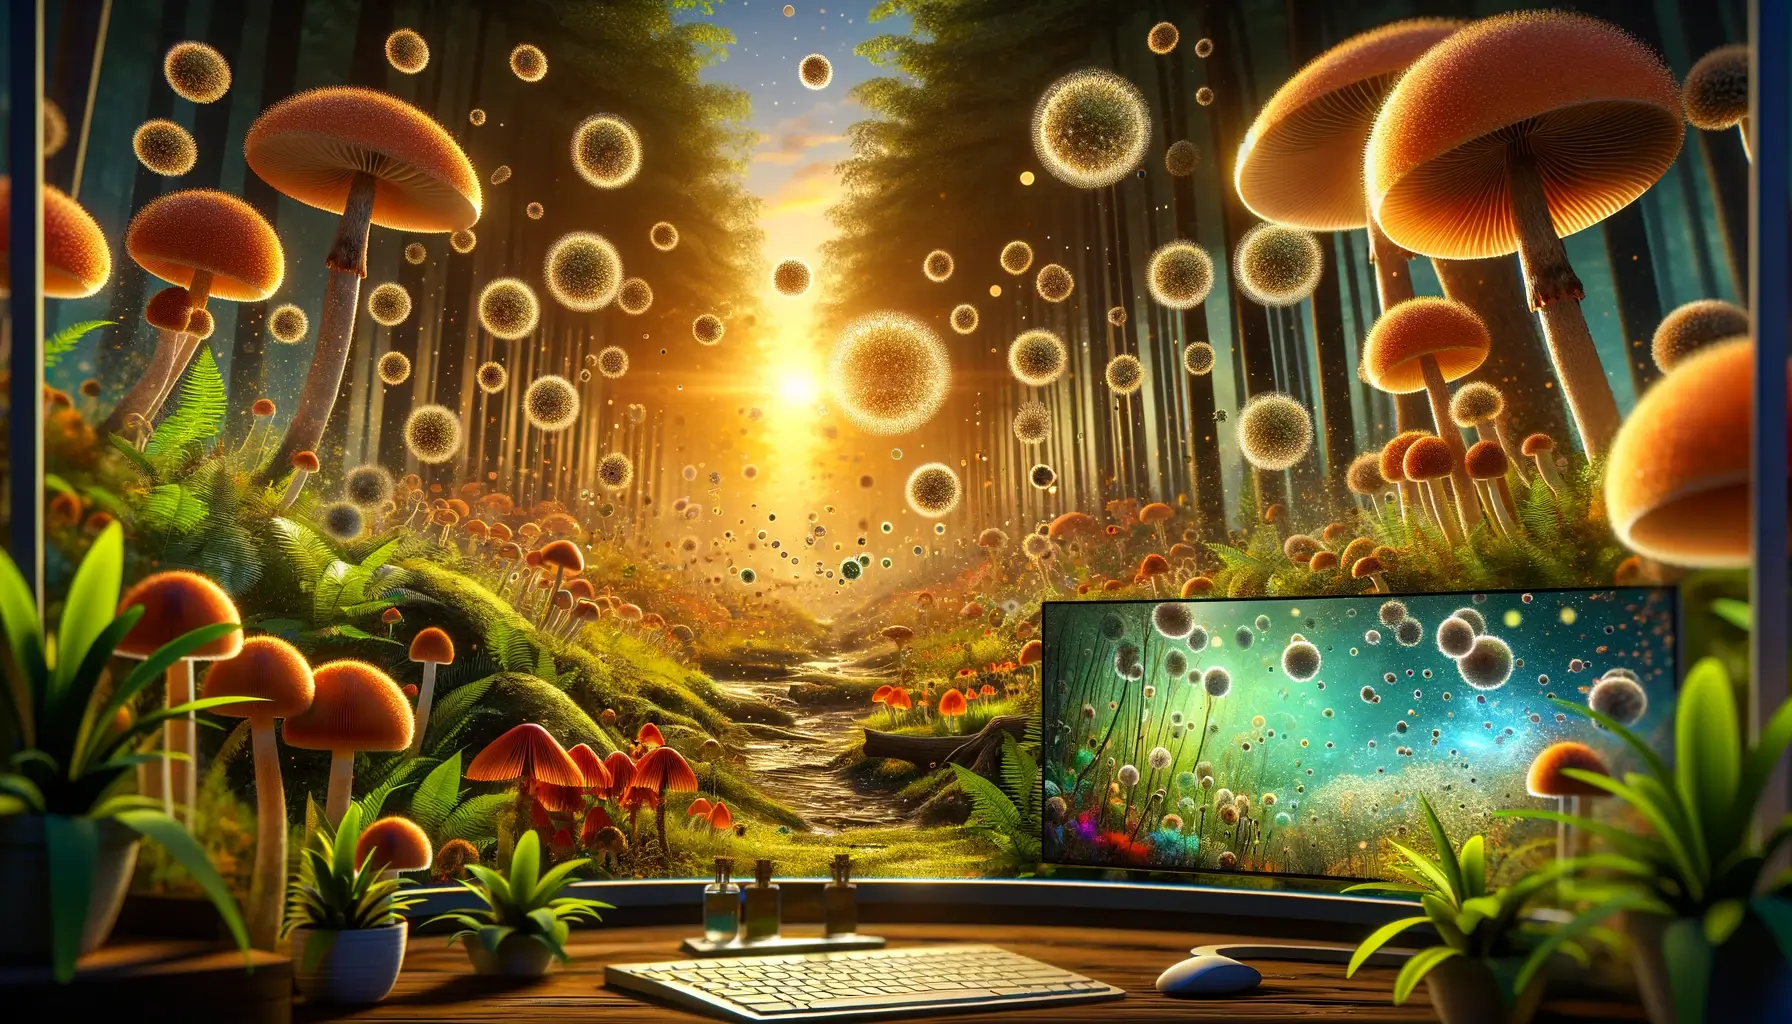 A wide panoramic image capturing the essence of 'Intro to Mushroom Spores.' The image features a variety of mushrooms in a lush, vibrant forest, with a focus on the tiny spores being released into the air. The scene is animated with microscopic views of spores floating, emphasizing their role in the ecosystem. The setting sun casts a golden light over the scene, enhancing the magical atmosphere of discovery and the beginning of the mushroom life cycle.